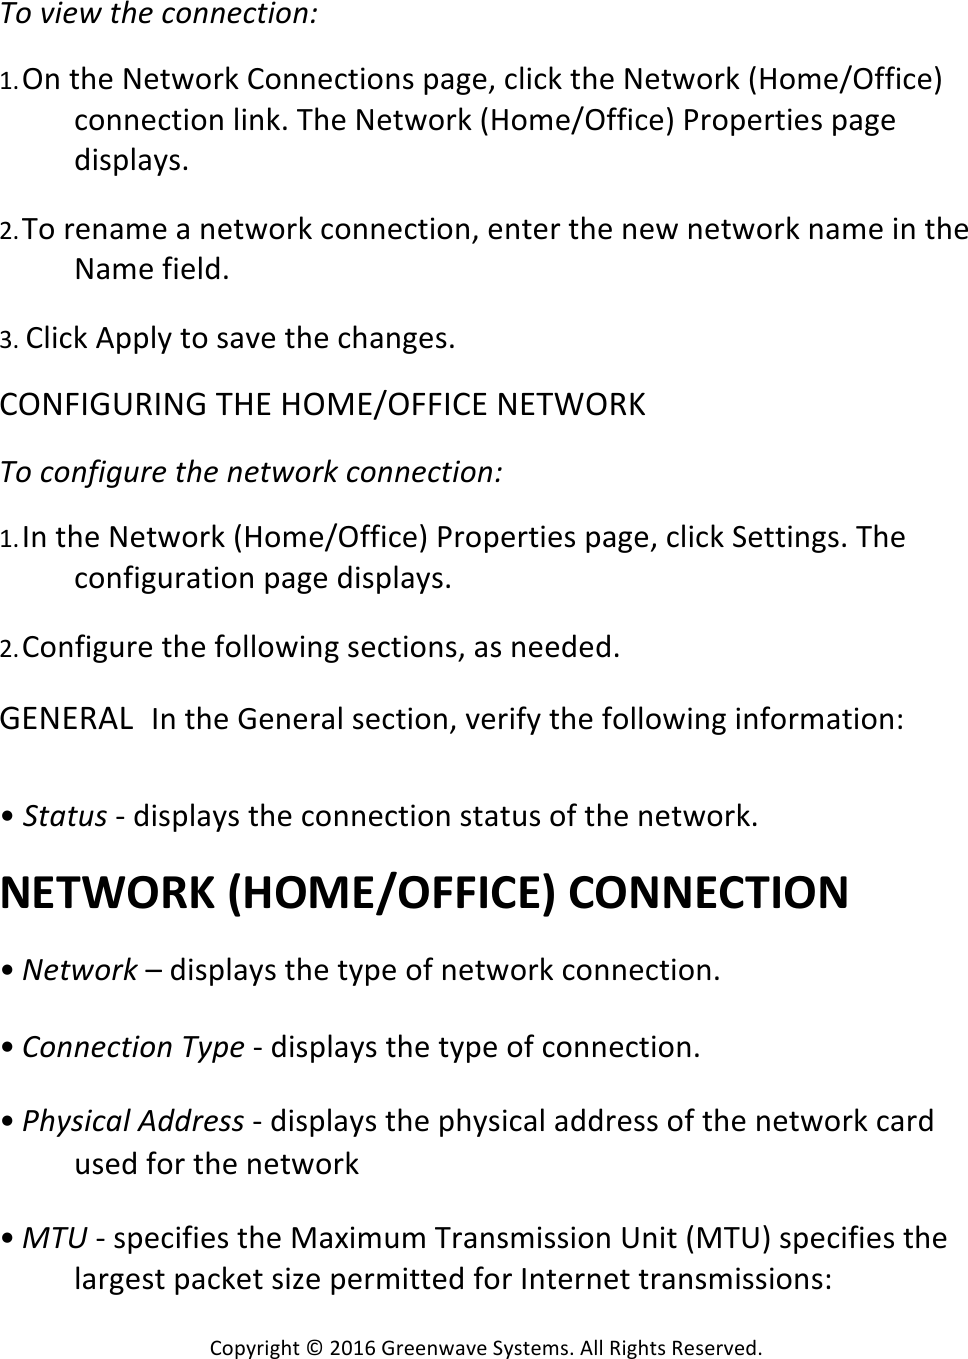 Copyright*©*2016*Greenwave*Systems.*All*Rights*Reserved.**V9!Y#)*!(Q)!=9@@)=(#9@B!*1. On*the*Network*Connections*page,*click*the*Network*(Home/Office)*connection*link.*The*Network*(Home/Office)*Properties*page*displays.* *2. To*rename*a*network*connection,*enter*the*new*network*name*in*the*Name*field.* *3.*Click*Apply*to*save*the*changes.**CONFIGURING*THE*HOME/OFFICE*NETWORK**V9!=9@E#?:;)!(Q)!@)(*9;&gt;!=9@@)=(#9@B!*1. In*the*Network*(Home/Office)*Properties*page,*click*Settings.*The*configuration*page*displays.* *2. Configure*the*following*sections,*as*needed.* *GENERAL In*the*General*section,*verify*the*following*information:*****•*%(&apos;(:A!-*displays*the*connection*status*of*the*network.**NETWORK%(HOME/OFFICE)%CONNECTION%*• J)(*9;&gt;!–*displays*the*type*of*network*connection.* *• U9@@)=(#9@!V+&lt;)!-*displays*the*type*of*connection.* *• TQ+A#=&apos;G!IDD;)AA!-*displays*the*physical*address*of*the*network*card*used*for*the*network* *• _VM!-*specifies*the*Maximum*Transmission*Unit*(MTU)*specifies*the*largest*packet*size*permitted*for*Internet*transmissions:**